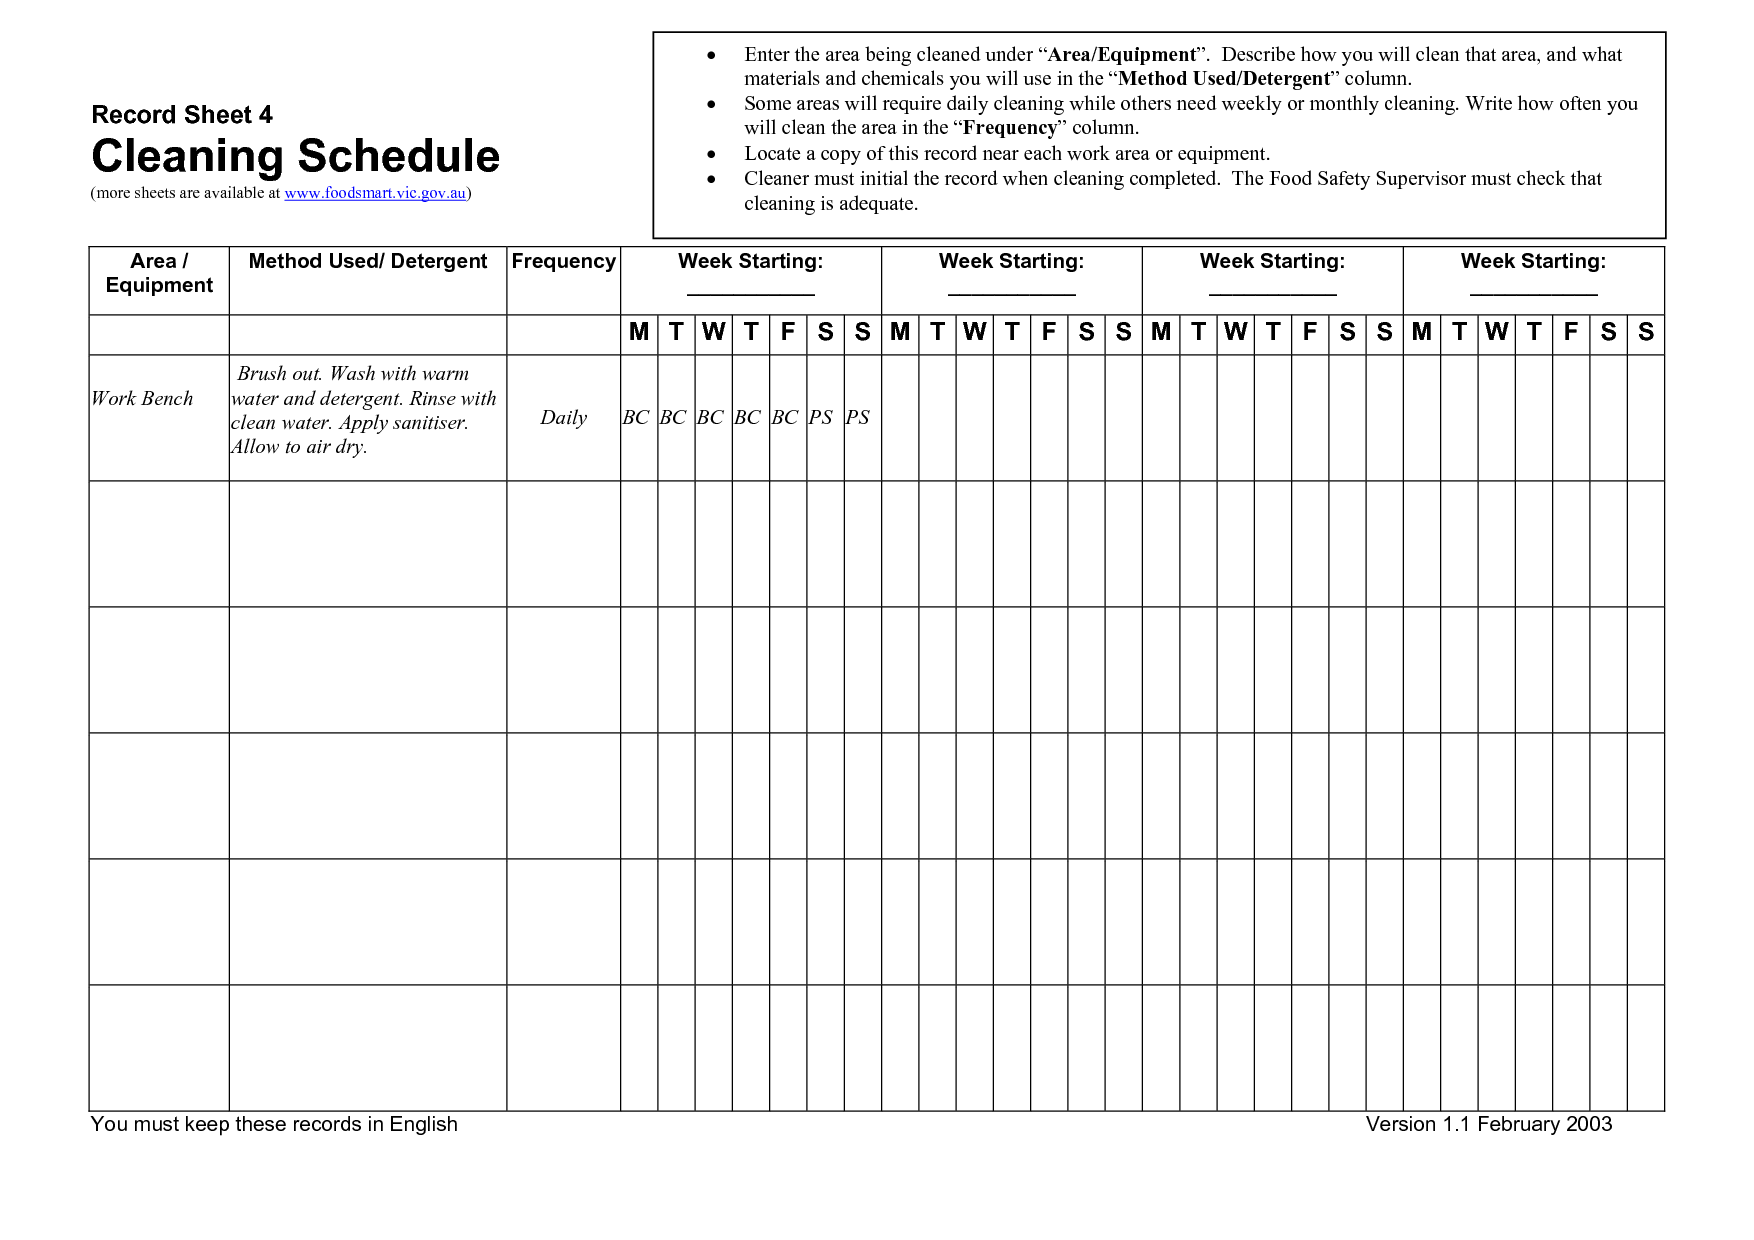 Cleaning Schedule Template Forms   Fillable & Printable Samples 